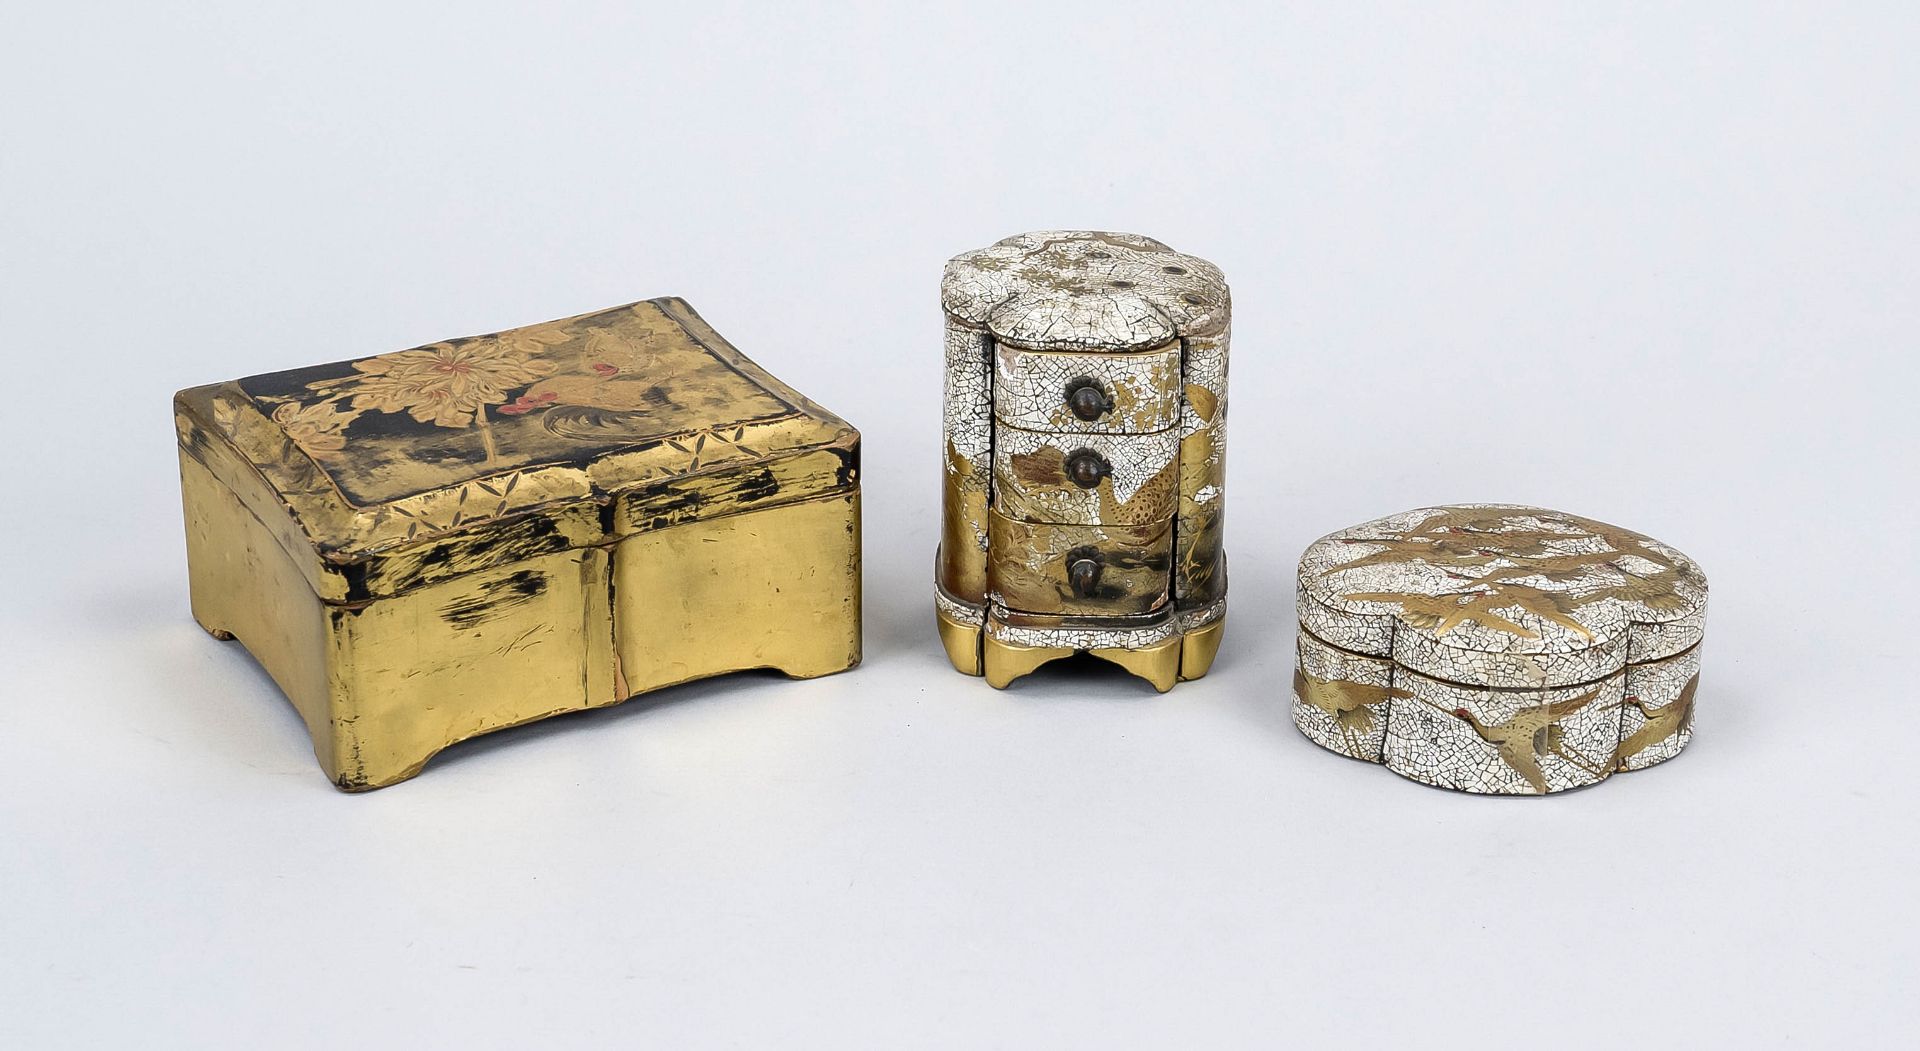 Mixed lot of 3 pieces of lacquerware, Japan c. 1900, all heavily rubbed & chipped, d. up to 15 cm